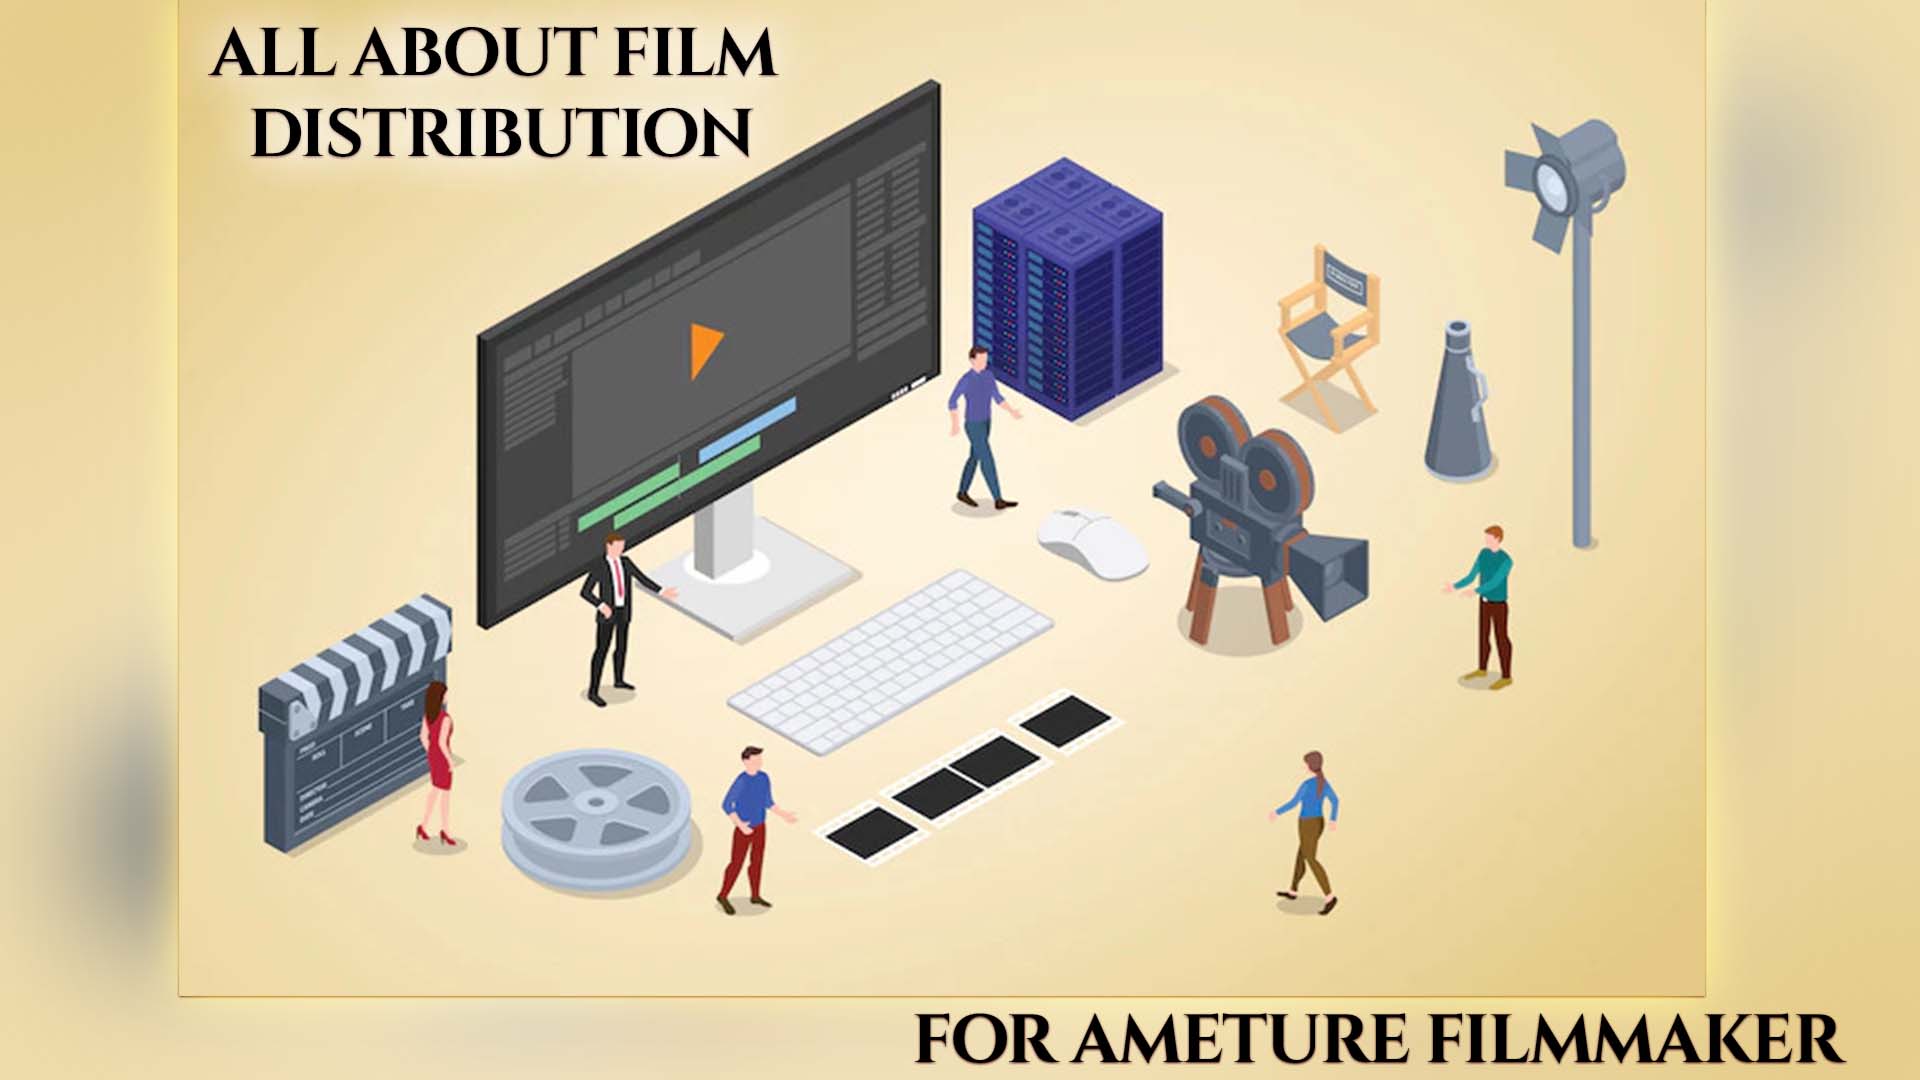 All About Film Distribution